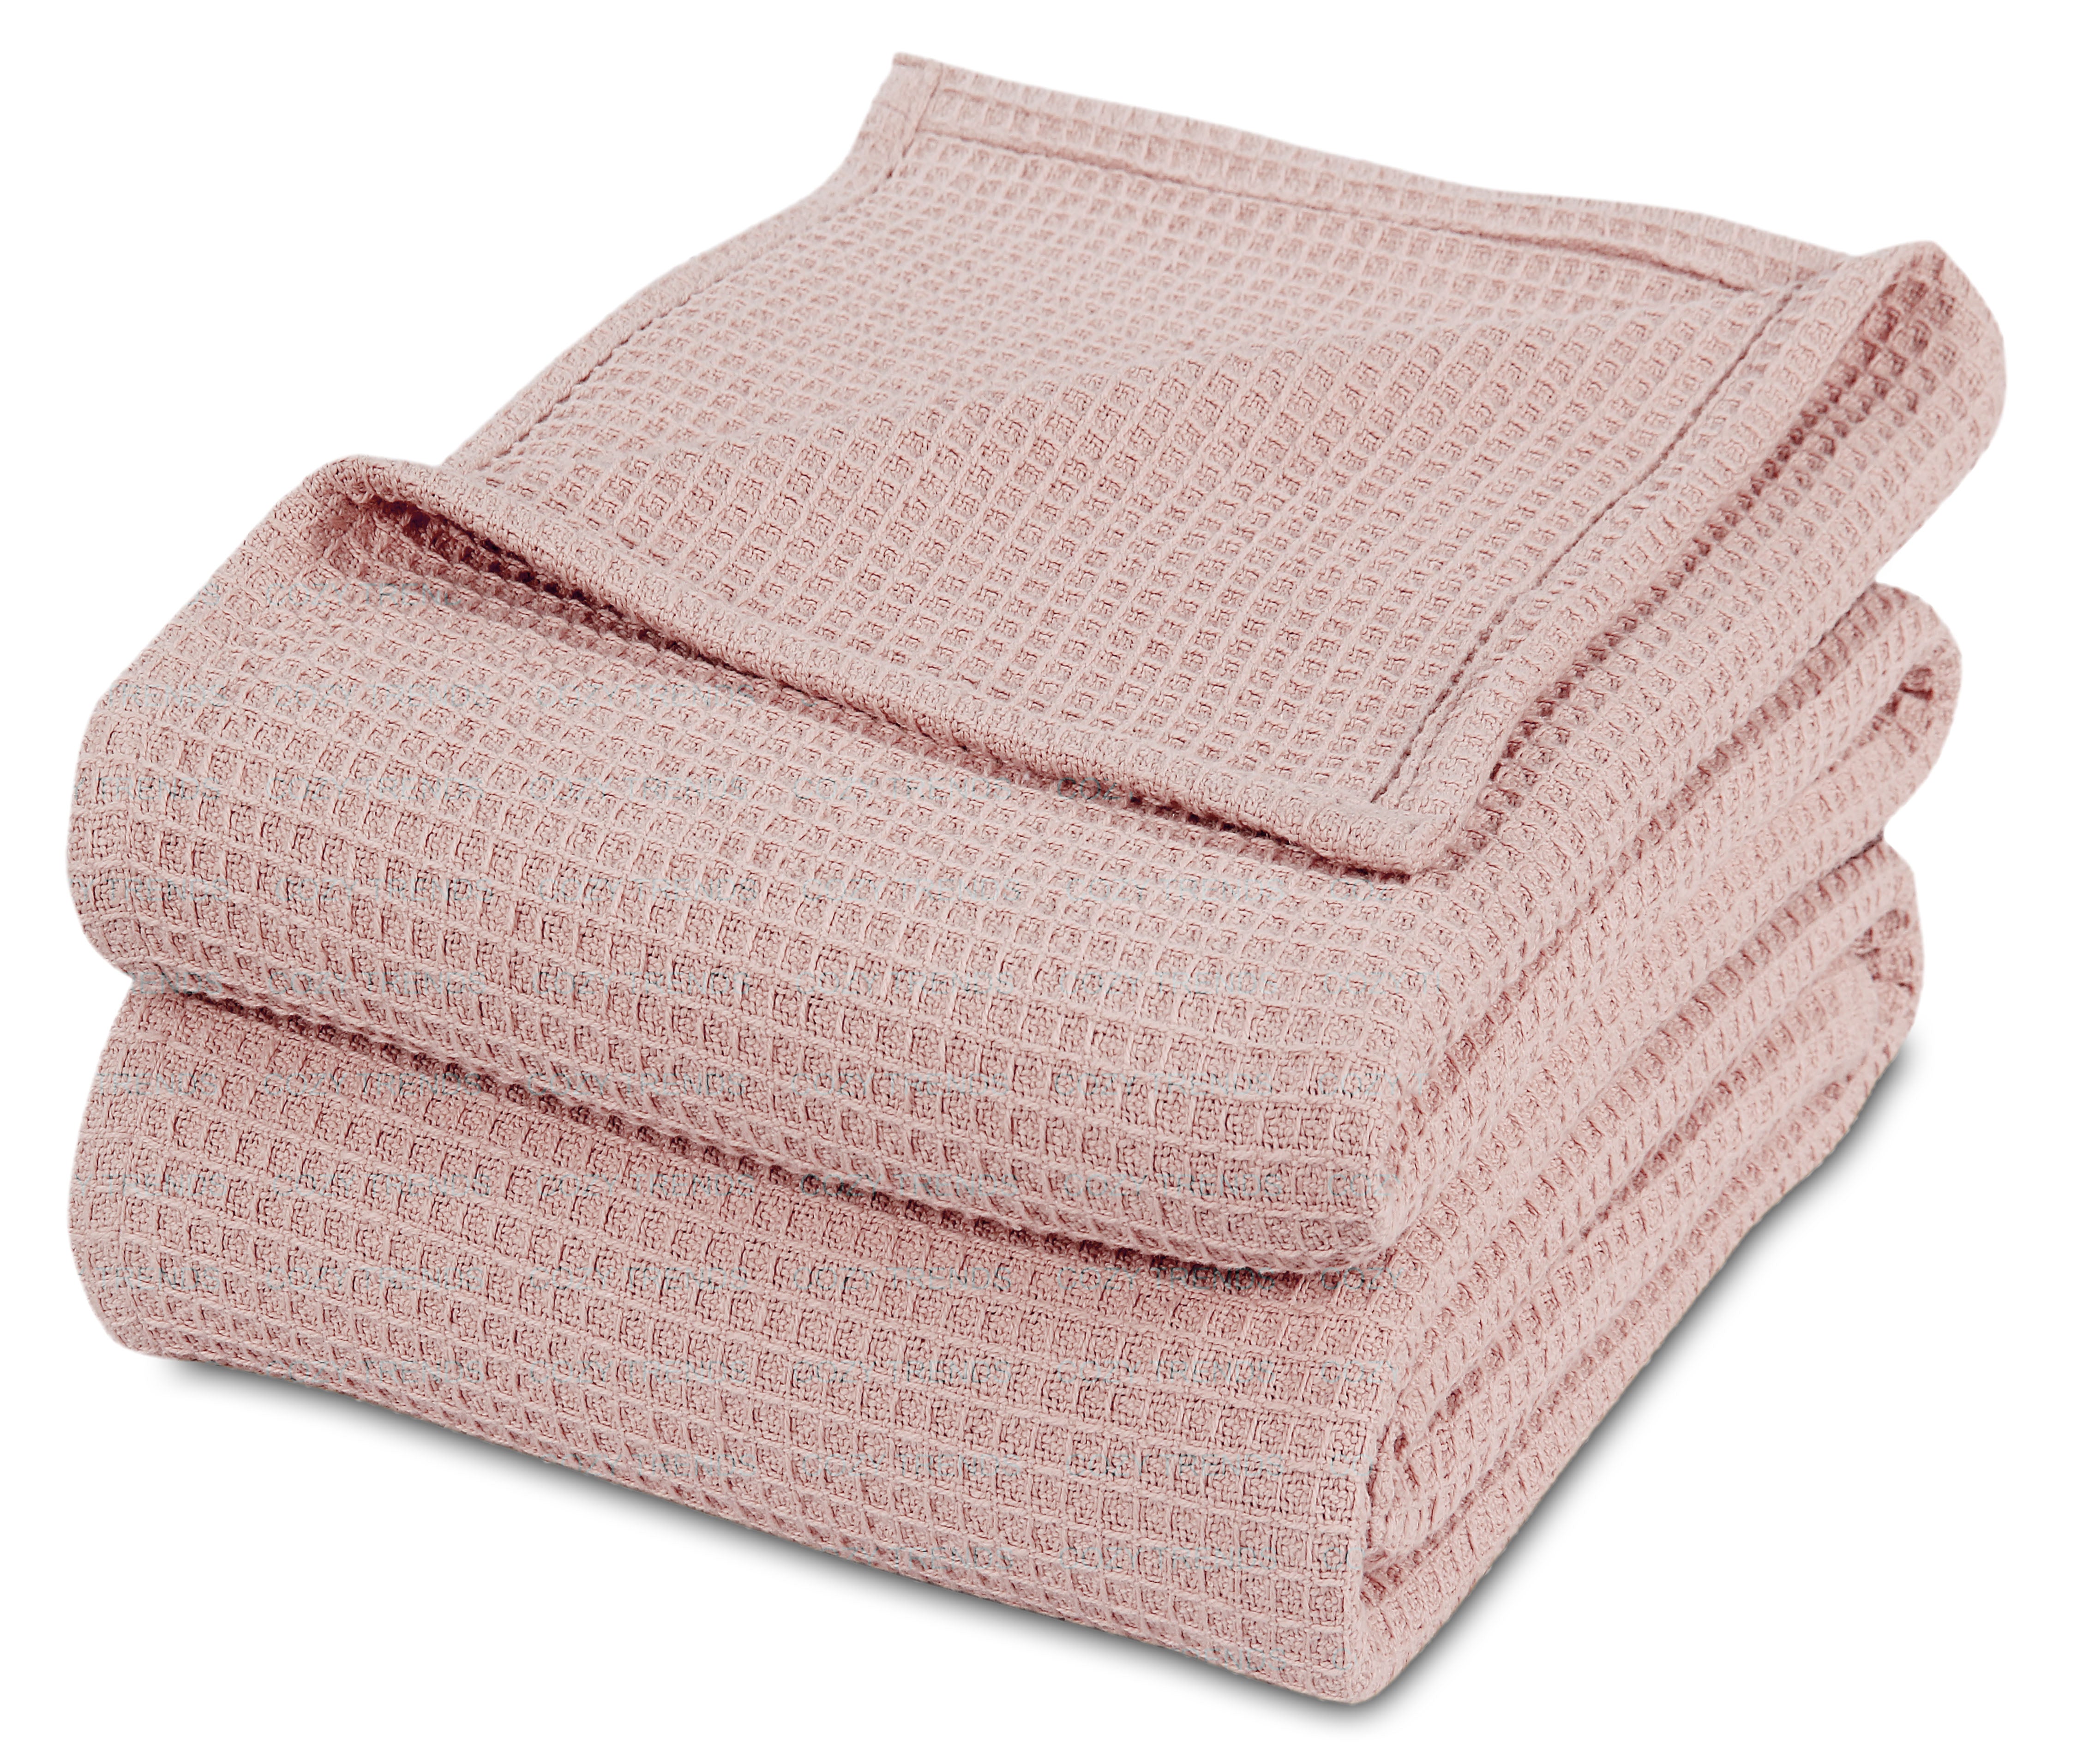 BLANKETS – cozyhomecollection